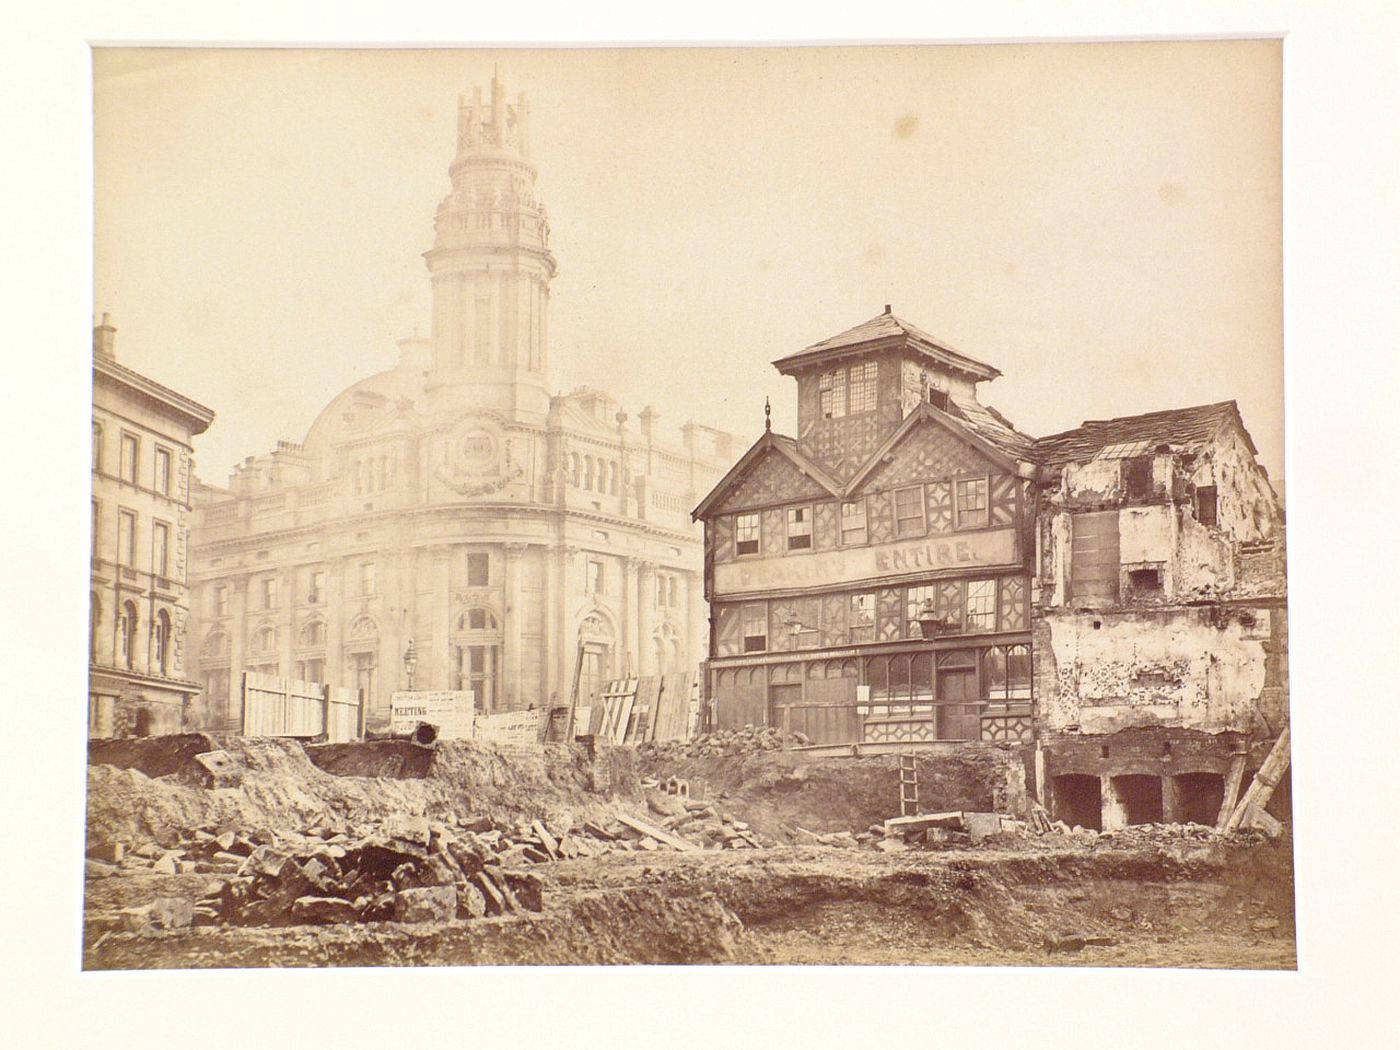 View of demolition/construction site showing Vintner's Arms and the new Royal Exchange, Manchester, England